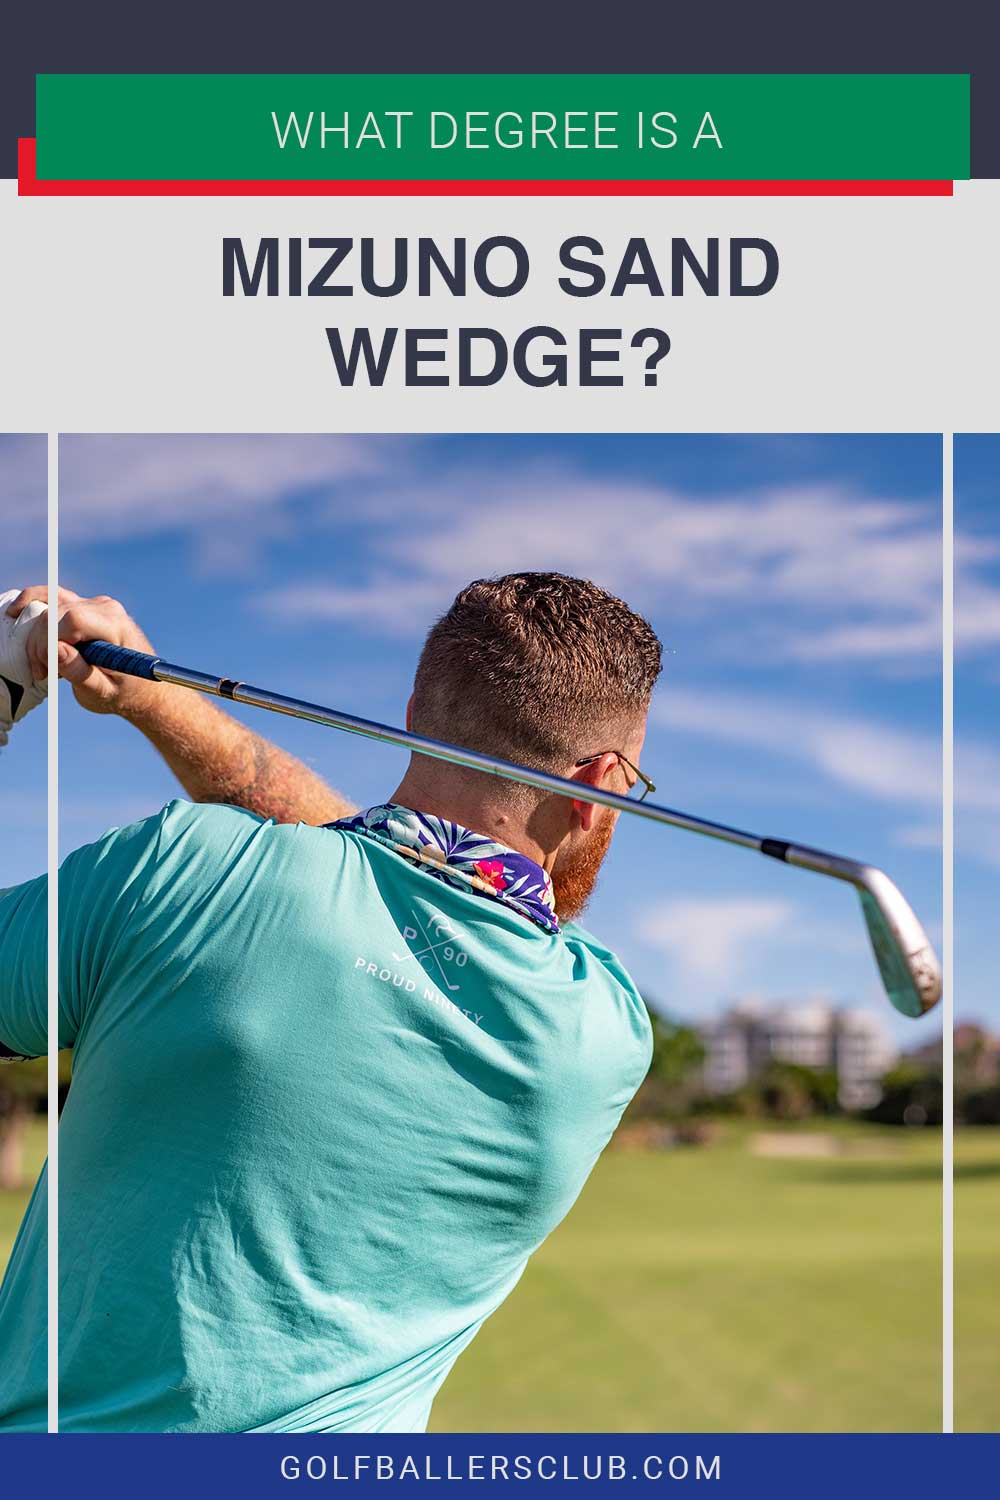 Man wearing Paradiso color polo playing golf - What Degree Is A Mizuno Sand Wedge?